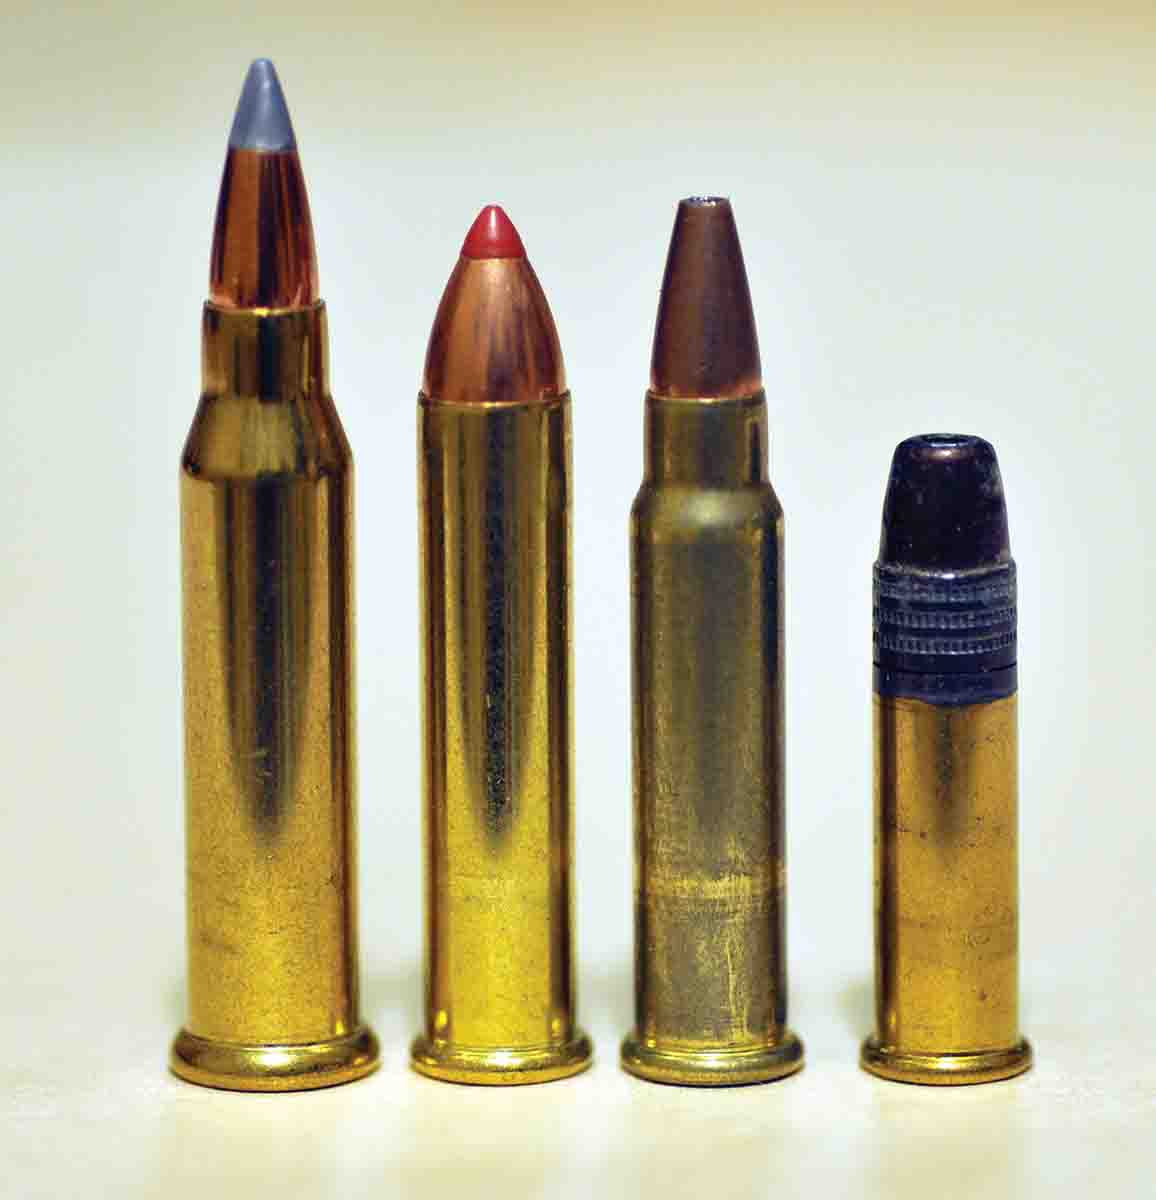 Left, the .17 WSM’s case (originally designed for industrial impact tools) shows the cartridge’s overall length and size is much different than the .22 WMR, .17 HMR and .22 Long Rifle cartridges.